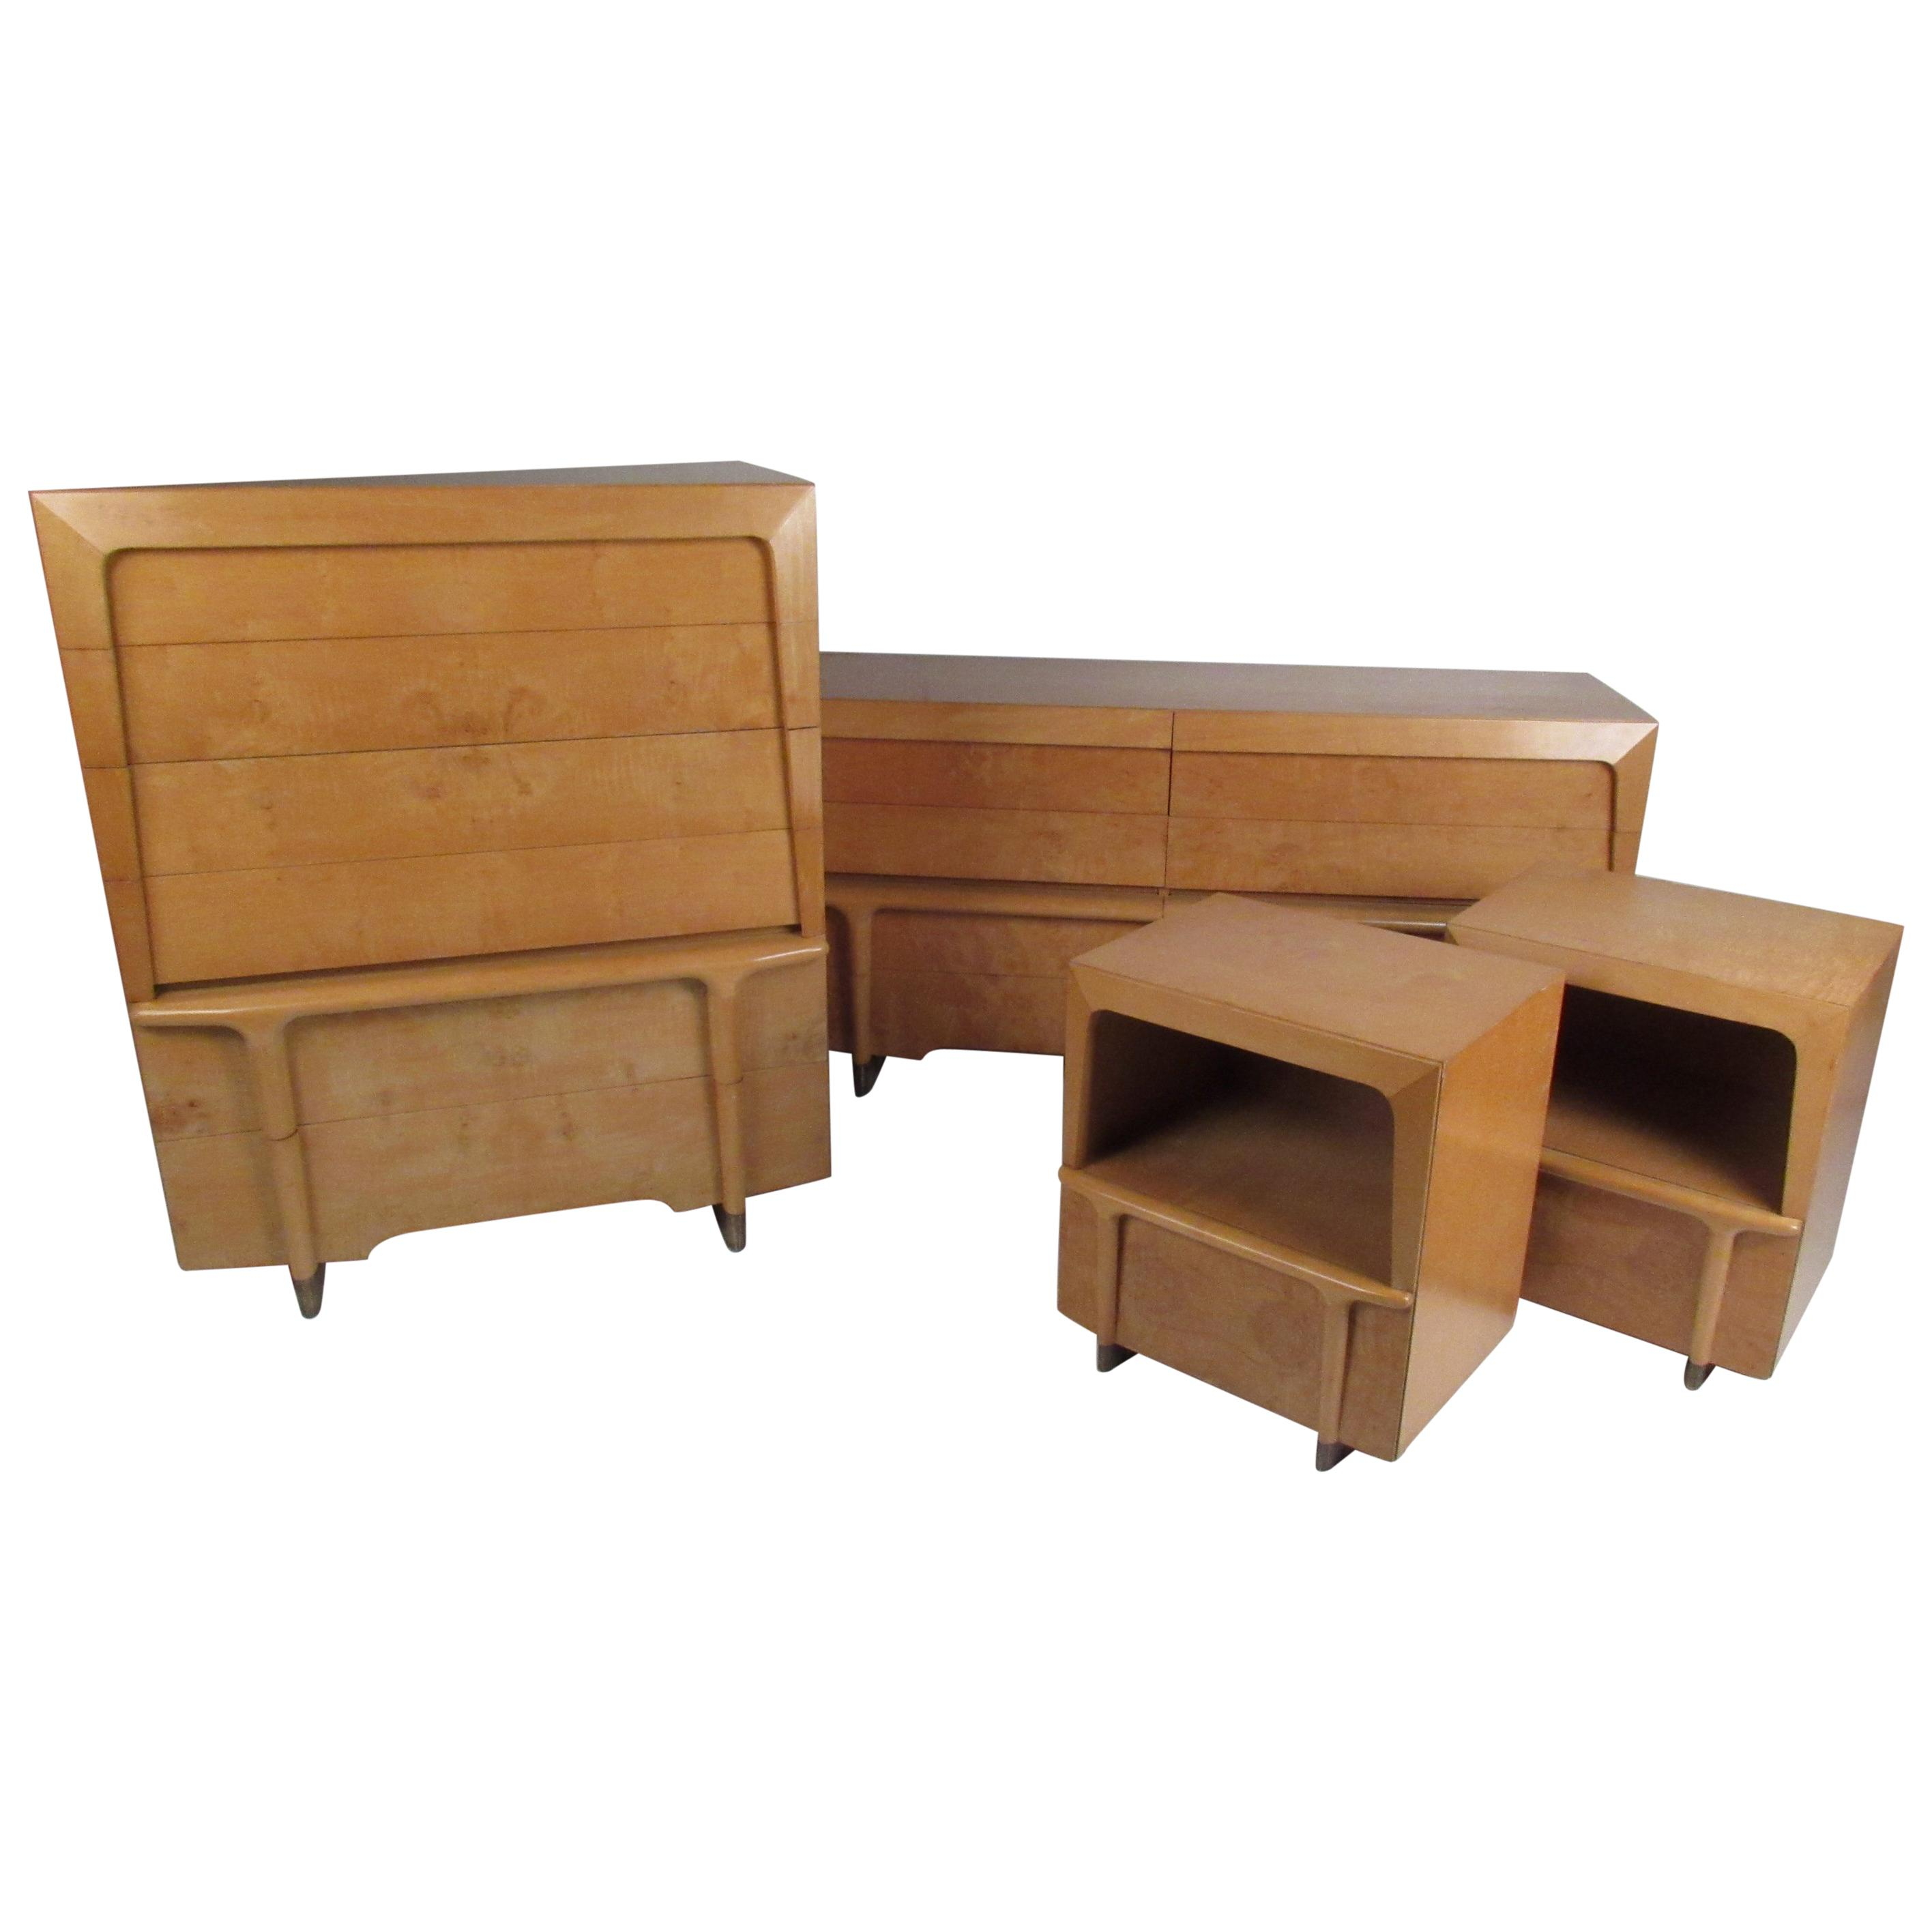 Mid Century Modern Burl Maple Bedroom Set In The Style Of Heywood Wakefield pertaining to size 2832 X 2832